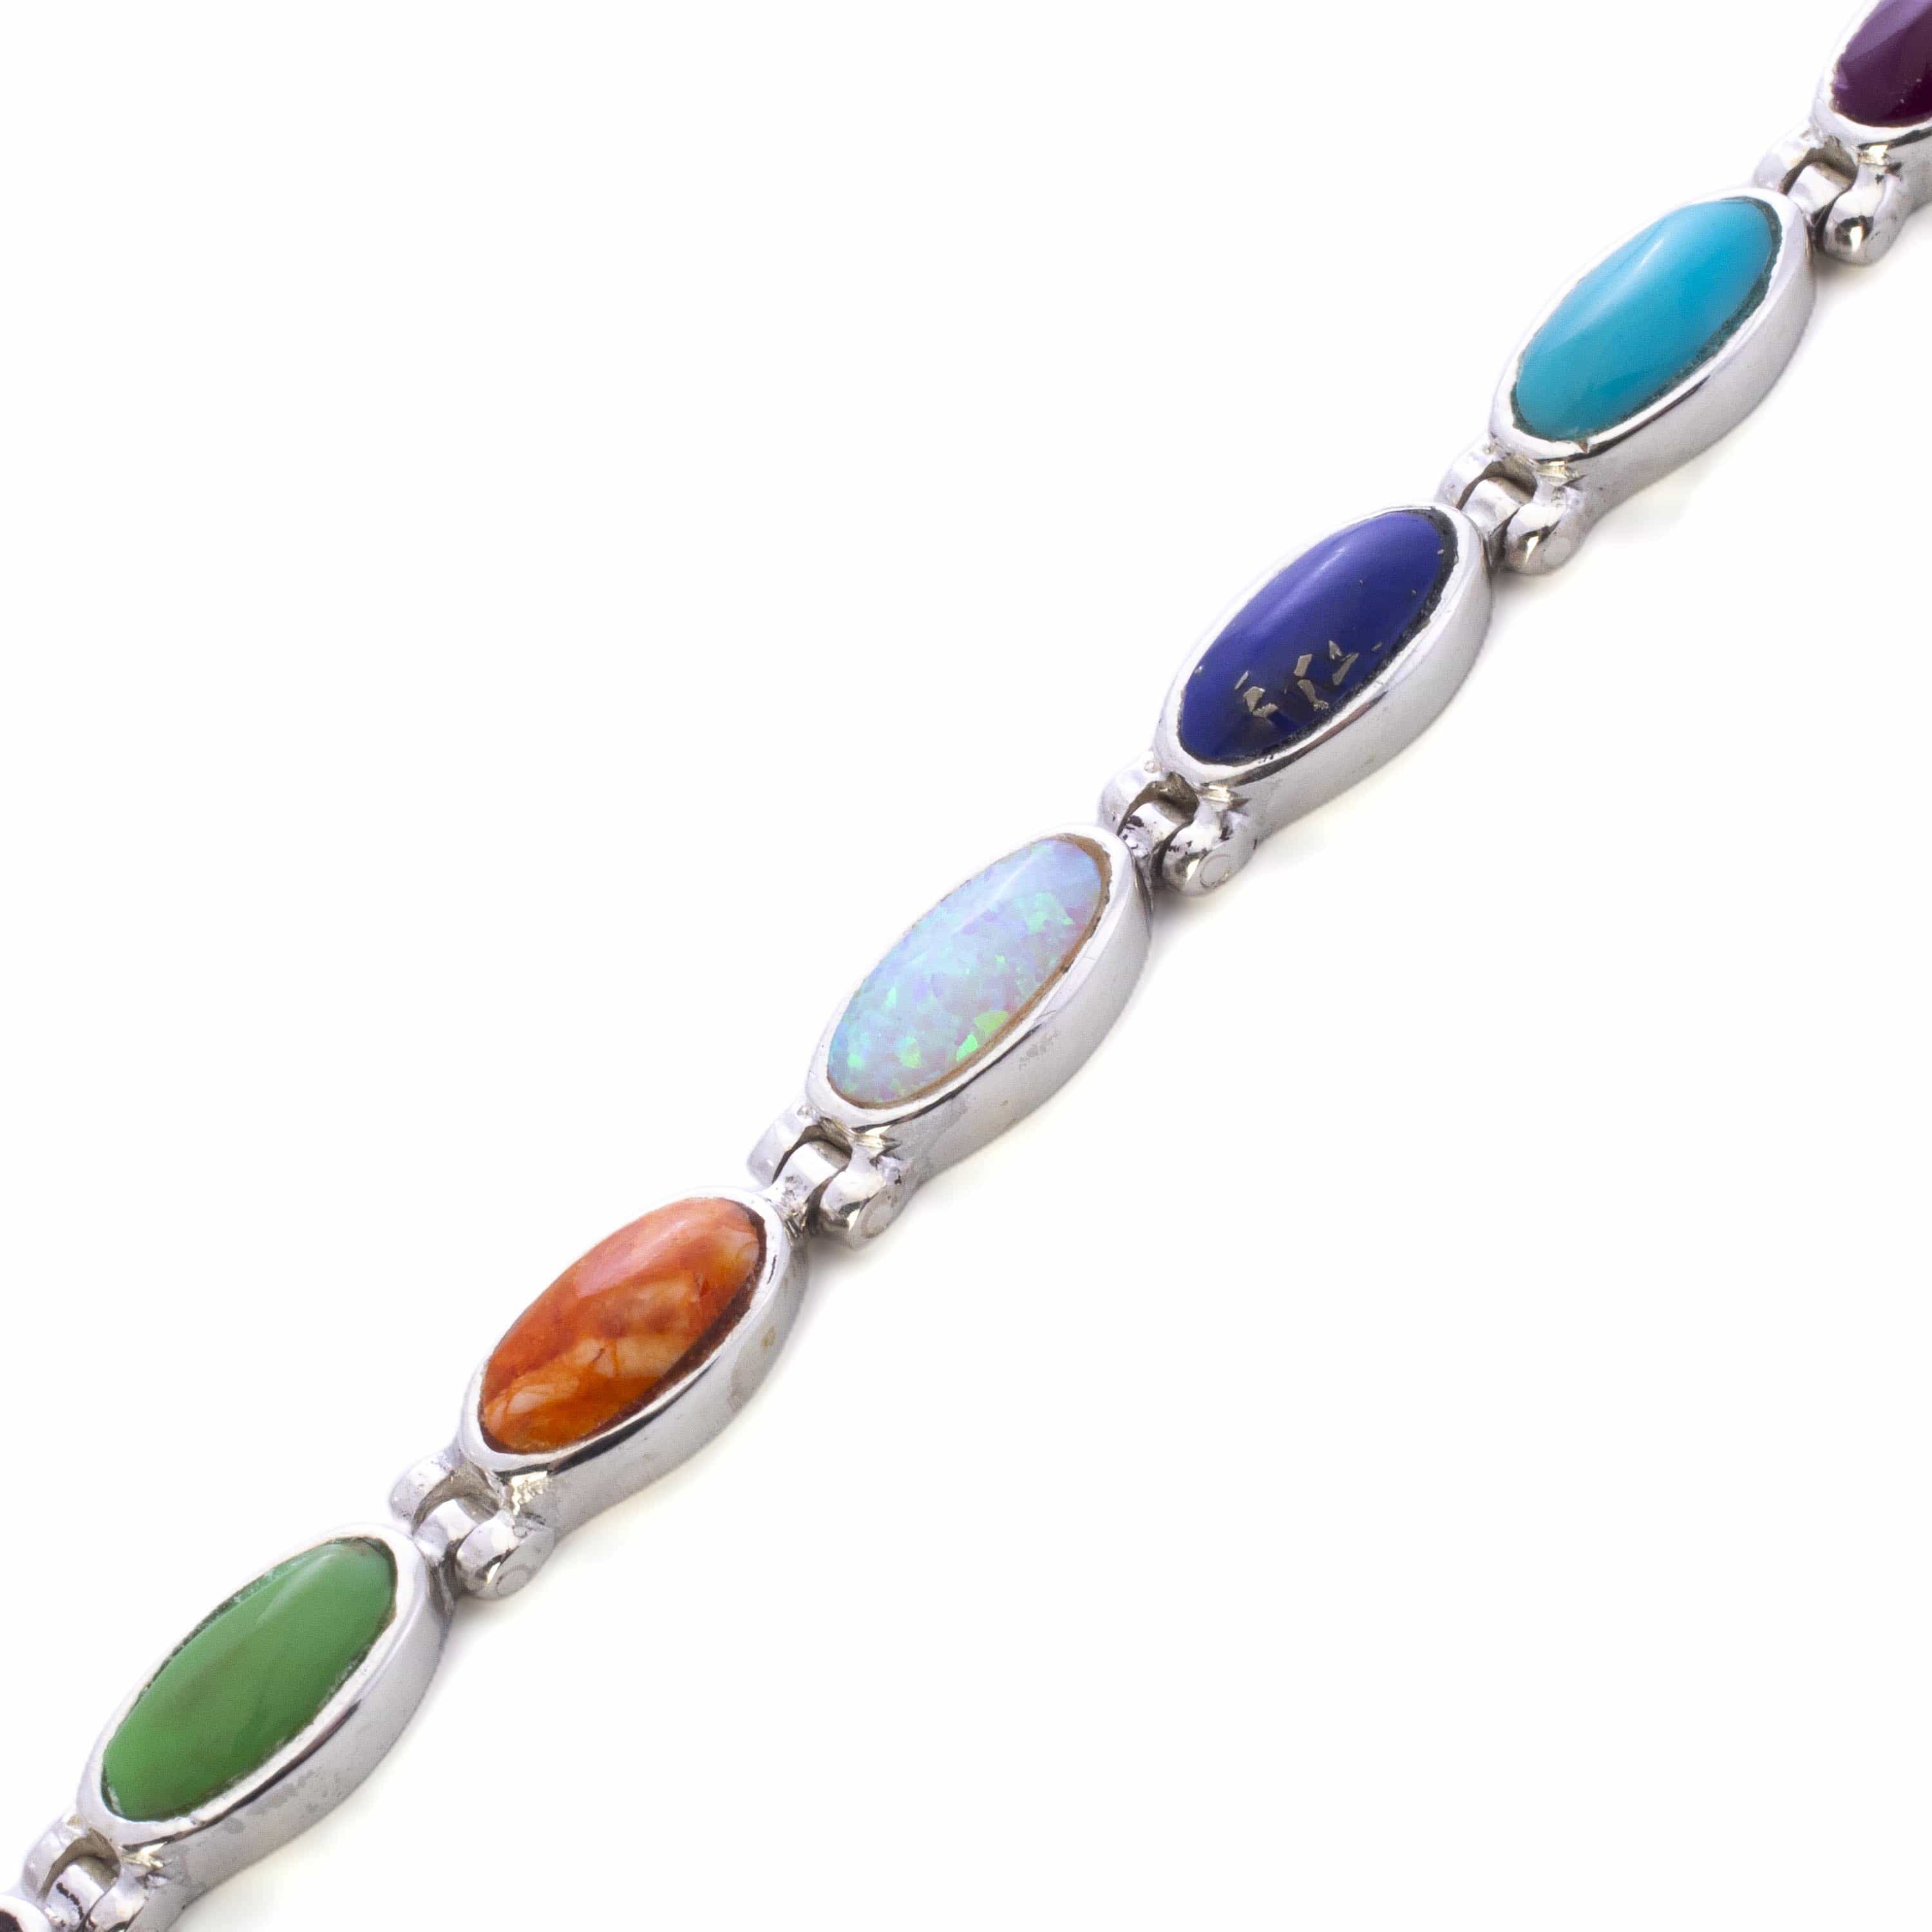 Kalifano Southwest Silver Jewelry Multi Gemstone Oval 925 Sterling Silver Bracelet USA Handmade with Opal Accent NMB.0559.MT